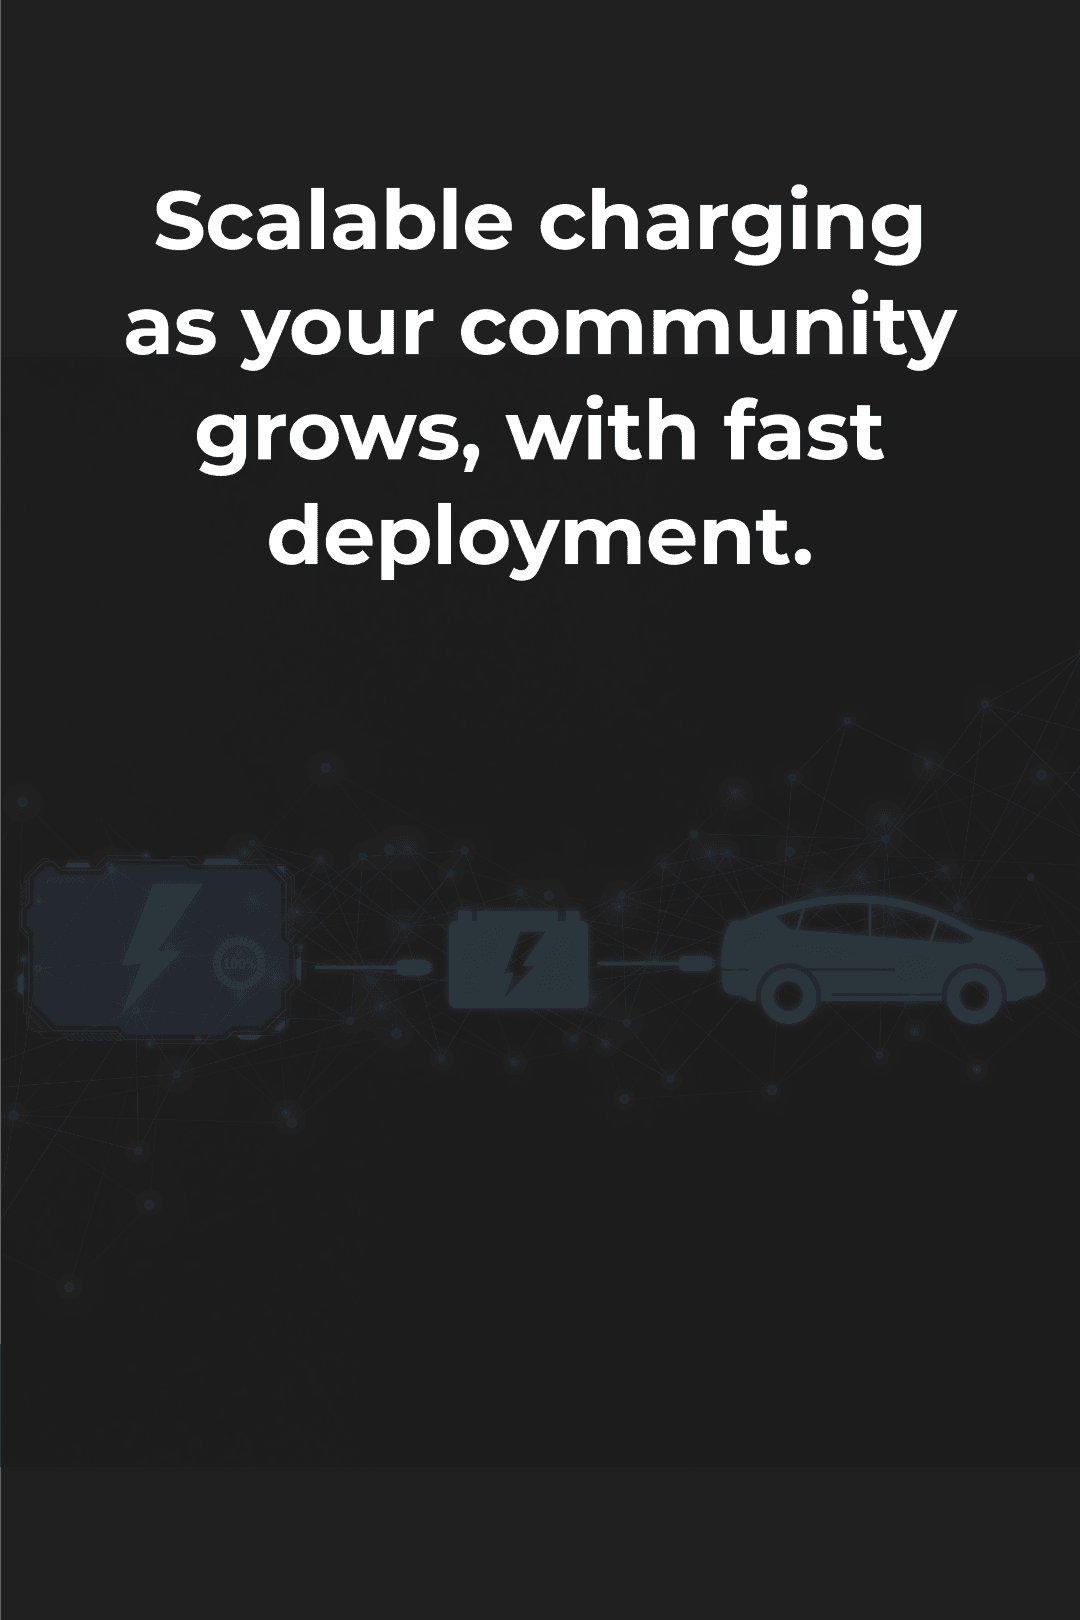 Scalable charging as your community grows, with fast deployment.